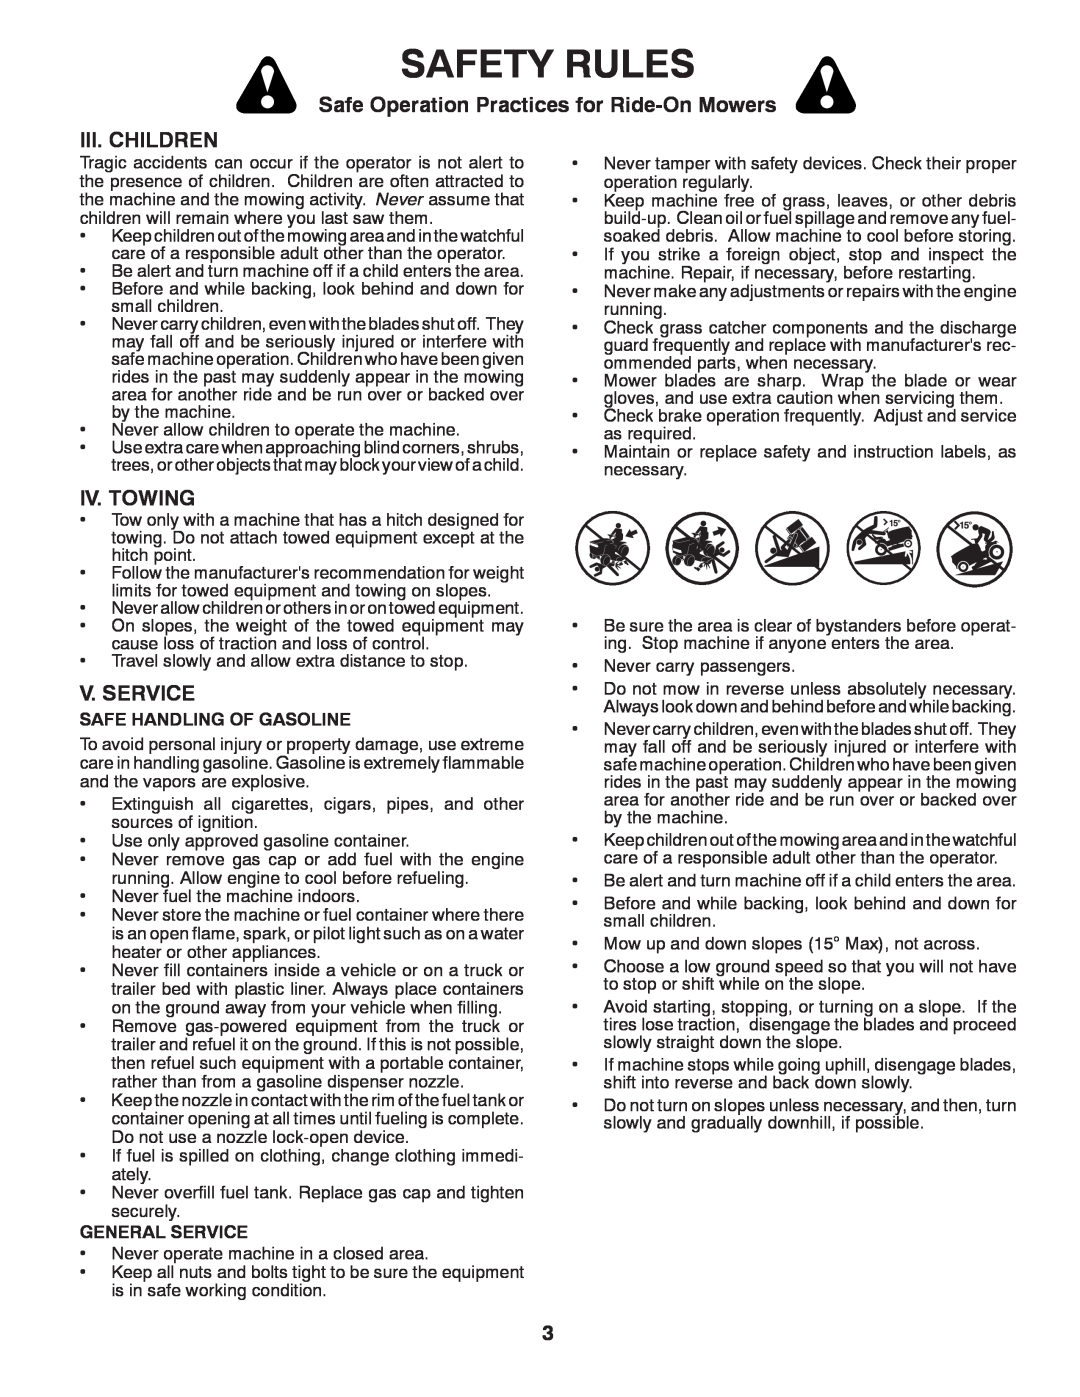 Poulan PO175H42LT manual Iii. Children, Iv. Towing, V. Service, Safety Rules, Safe Operation Practices for Ride-On Mowers 